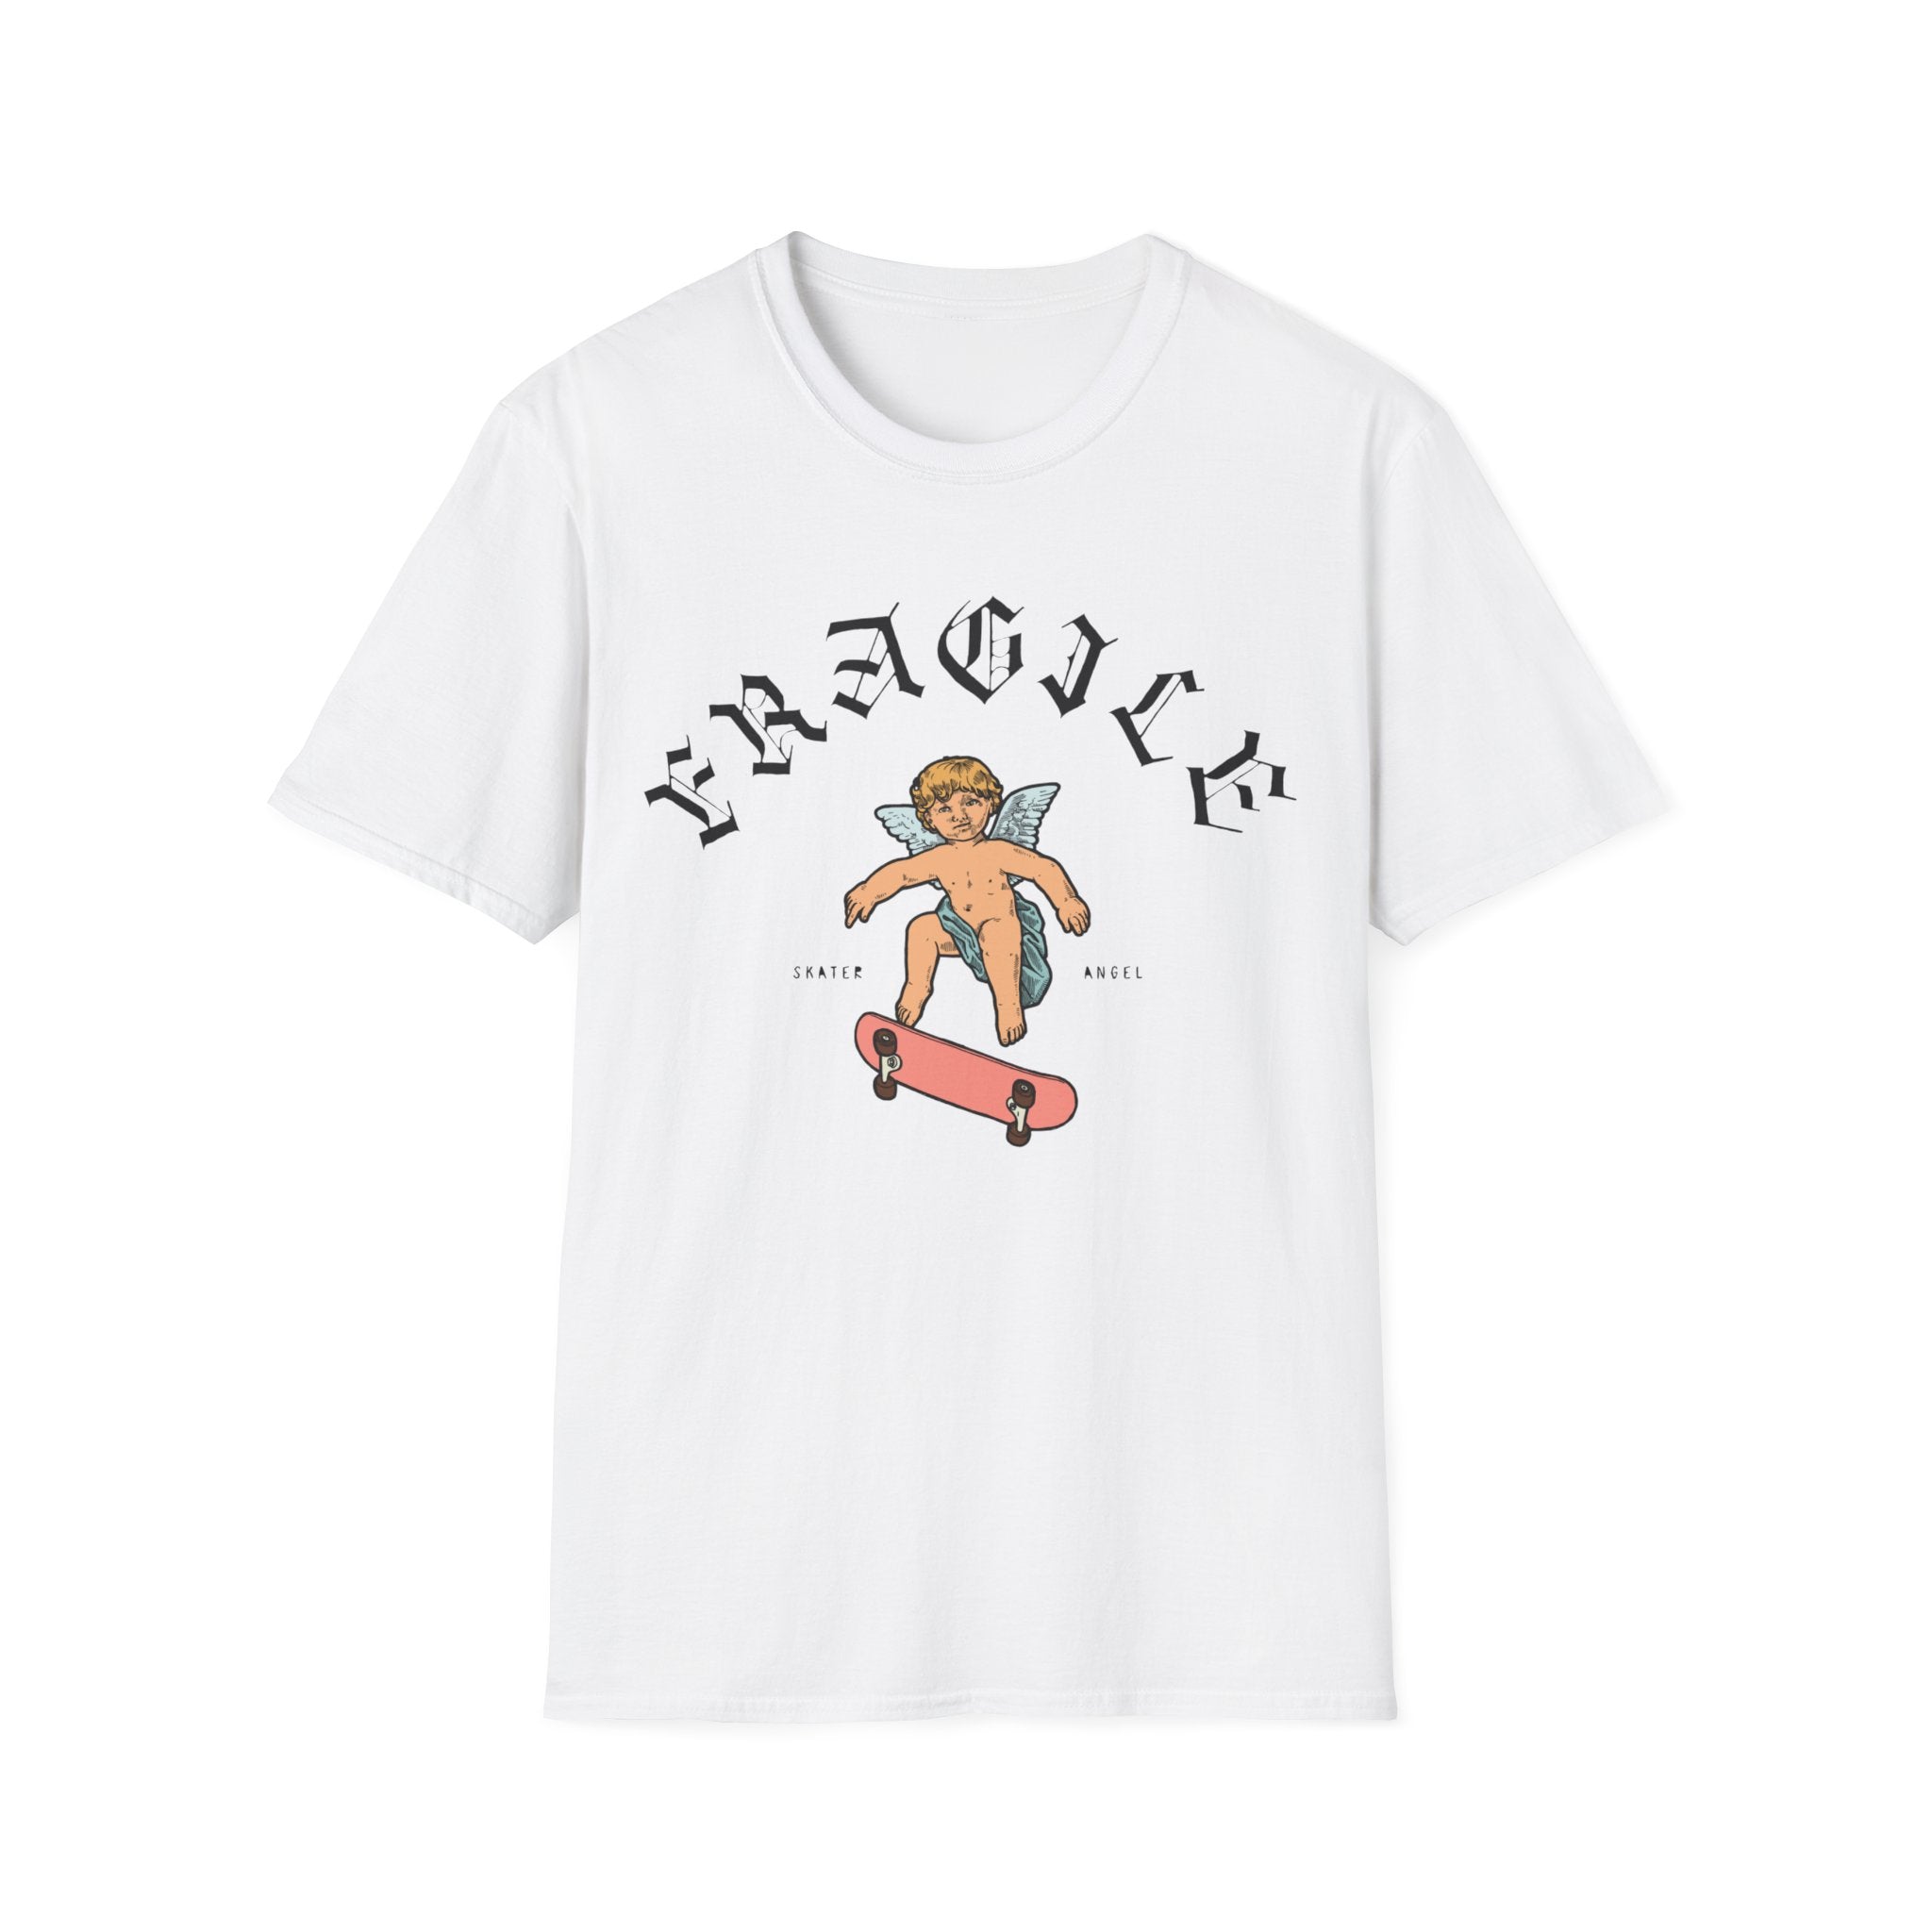 A soft, relaxed fit Skater Angel t-shirt featuring an image of a boy riding a skateboard.